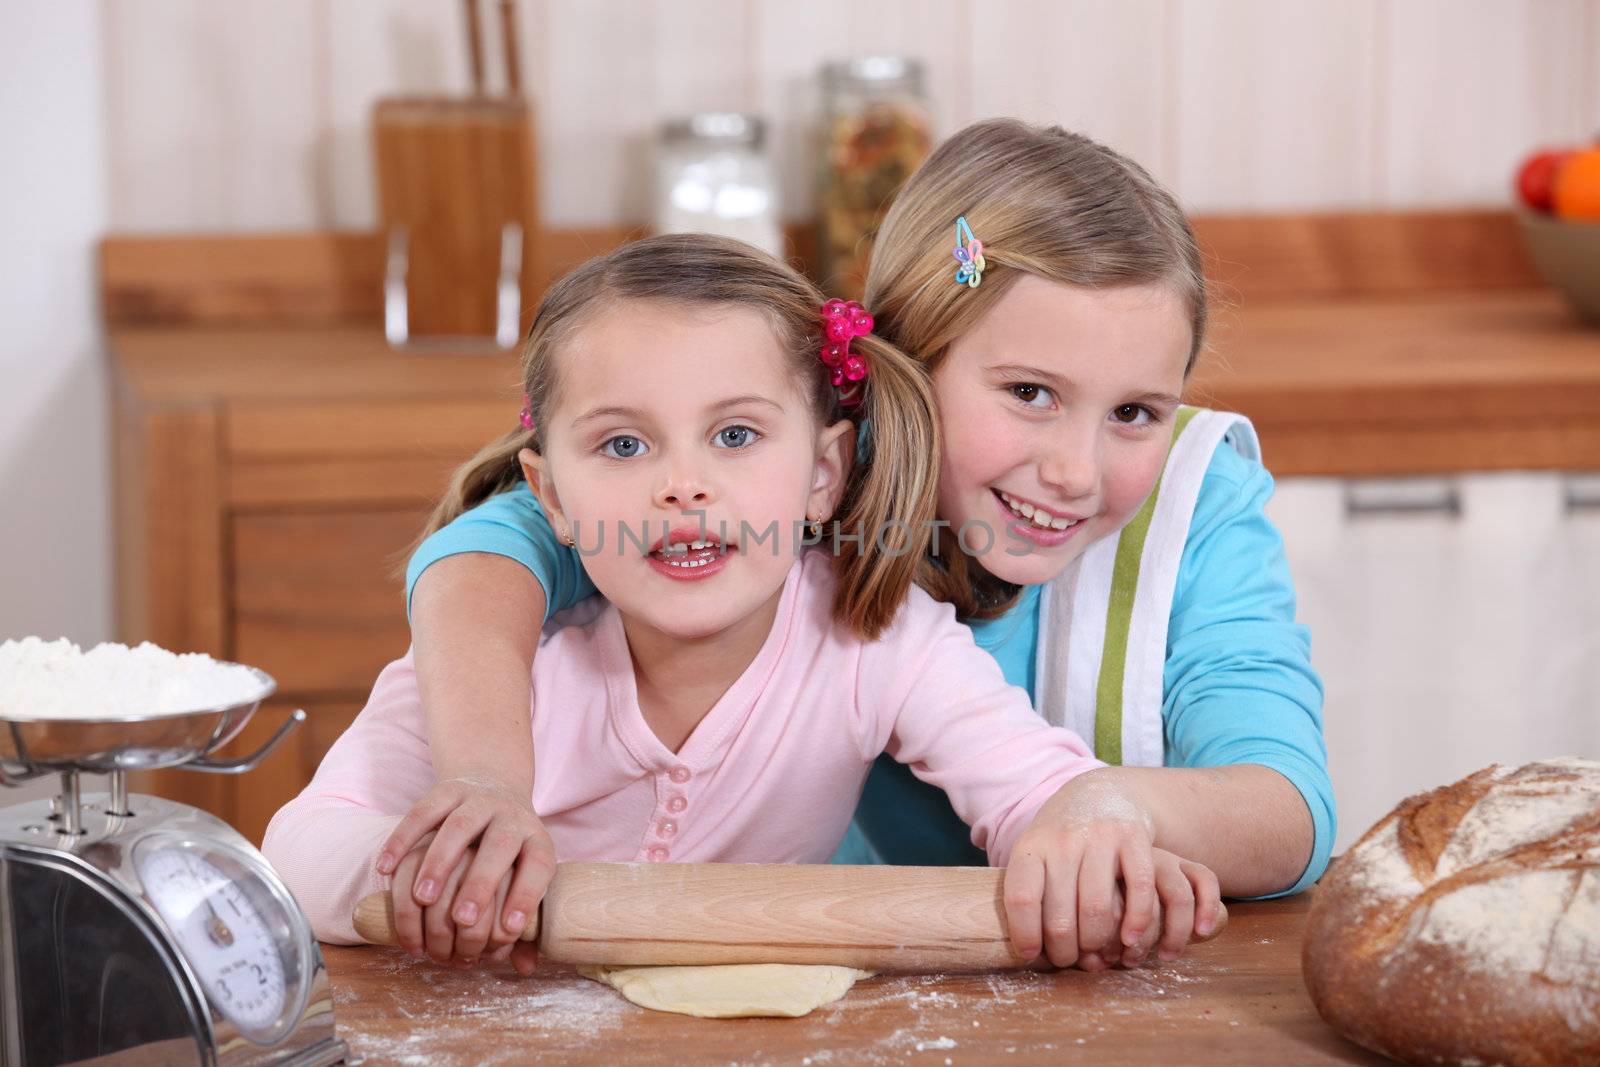 Sisters baking in the kitchen by phovoir